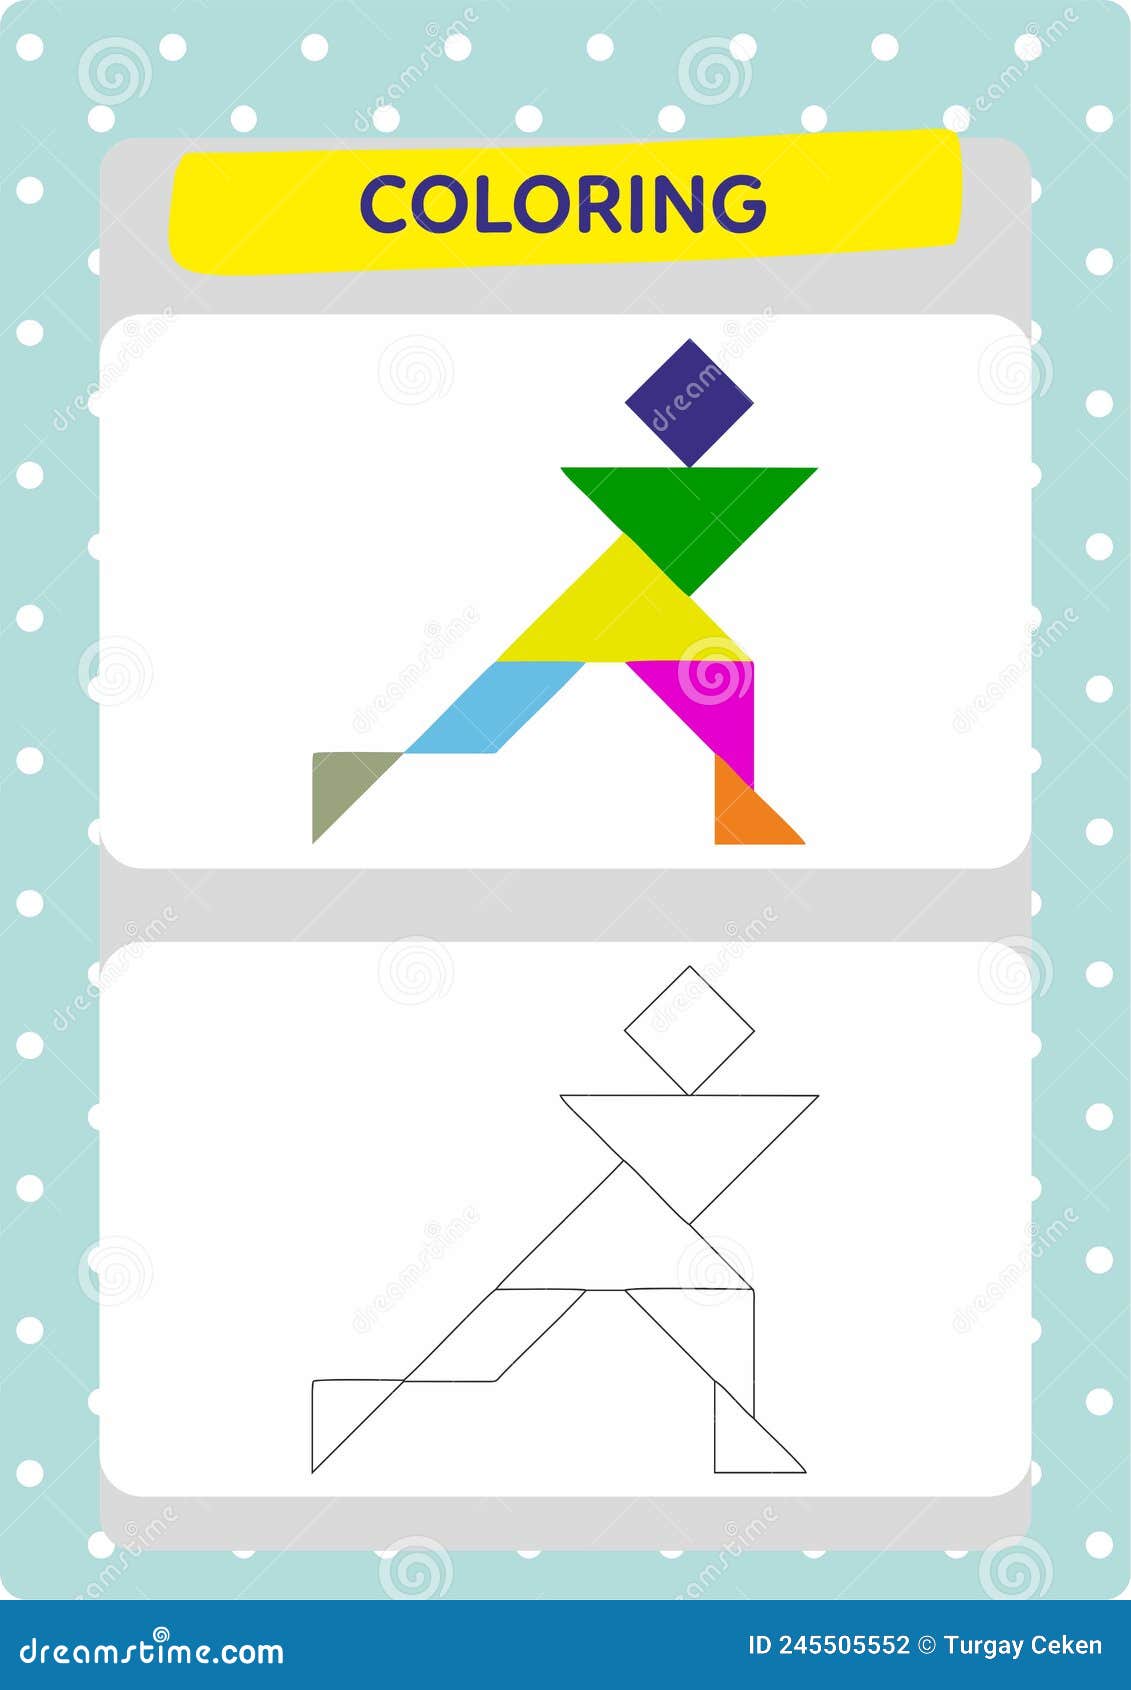 Animals and tangrams coloring page for kids stock vector